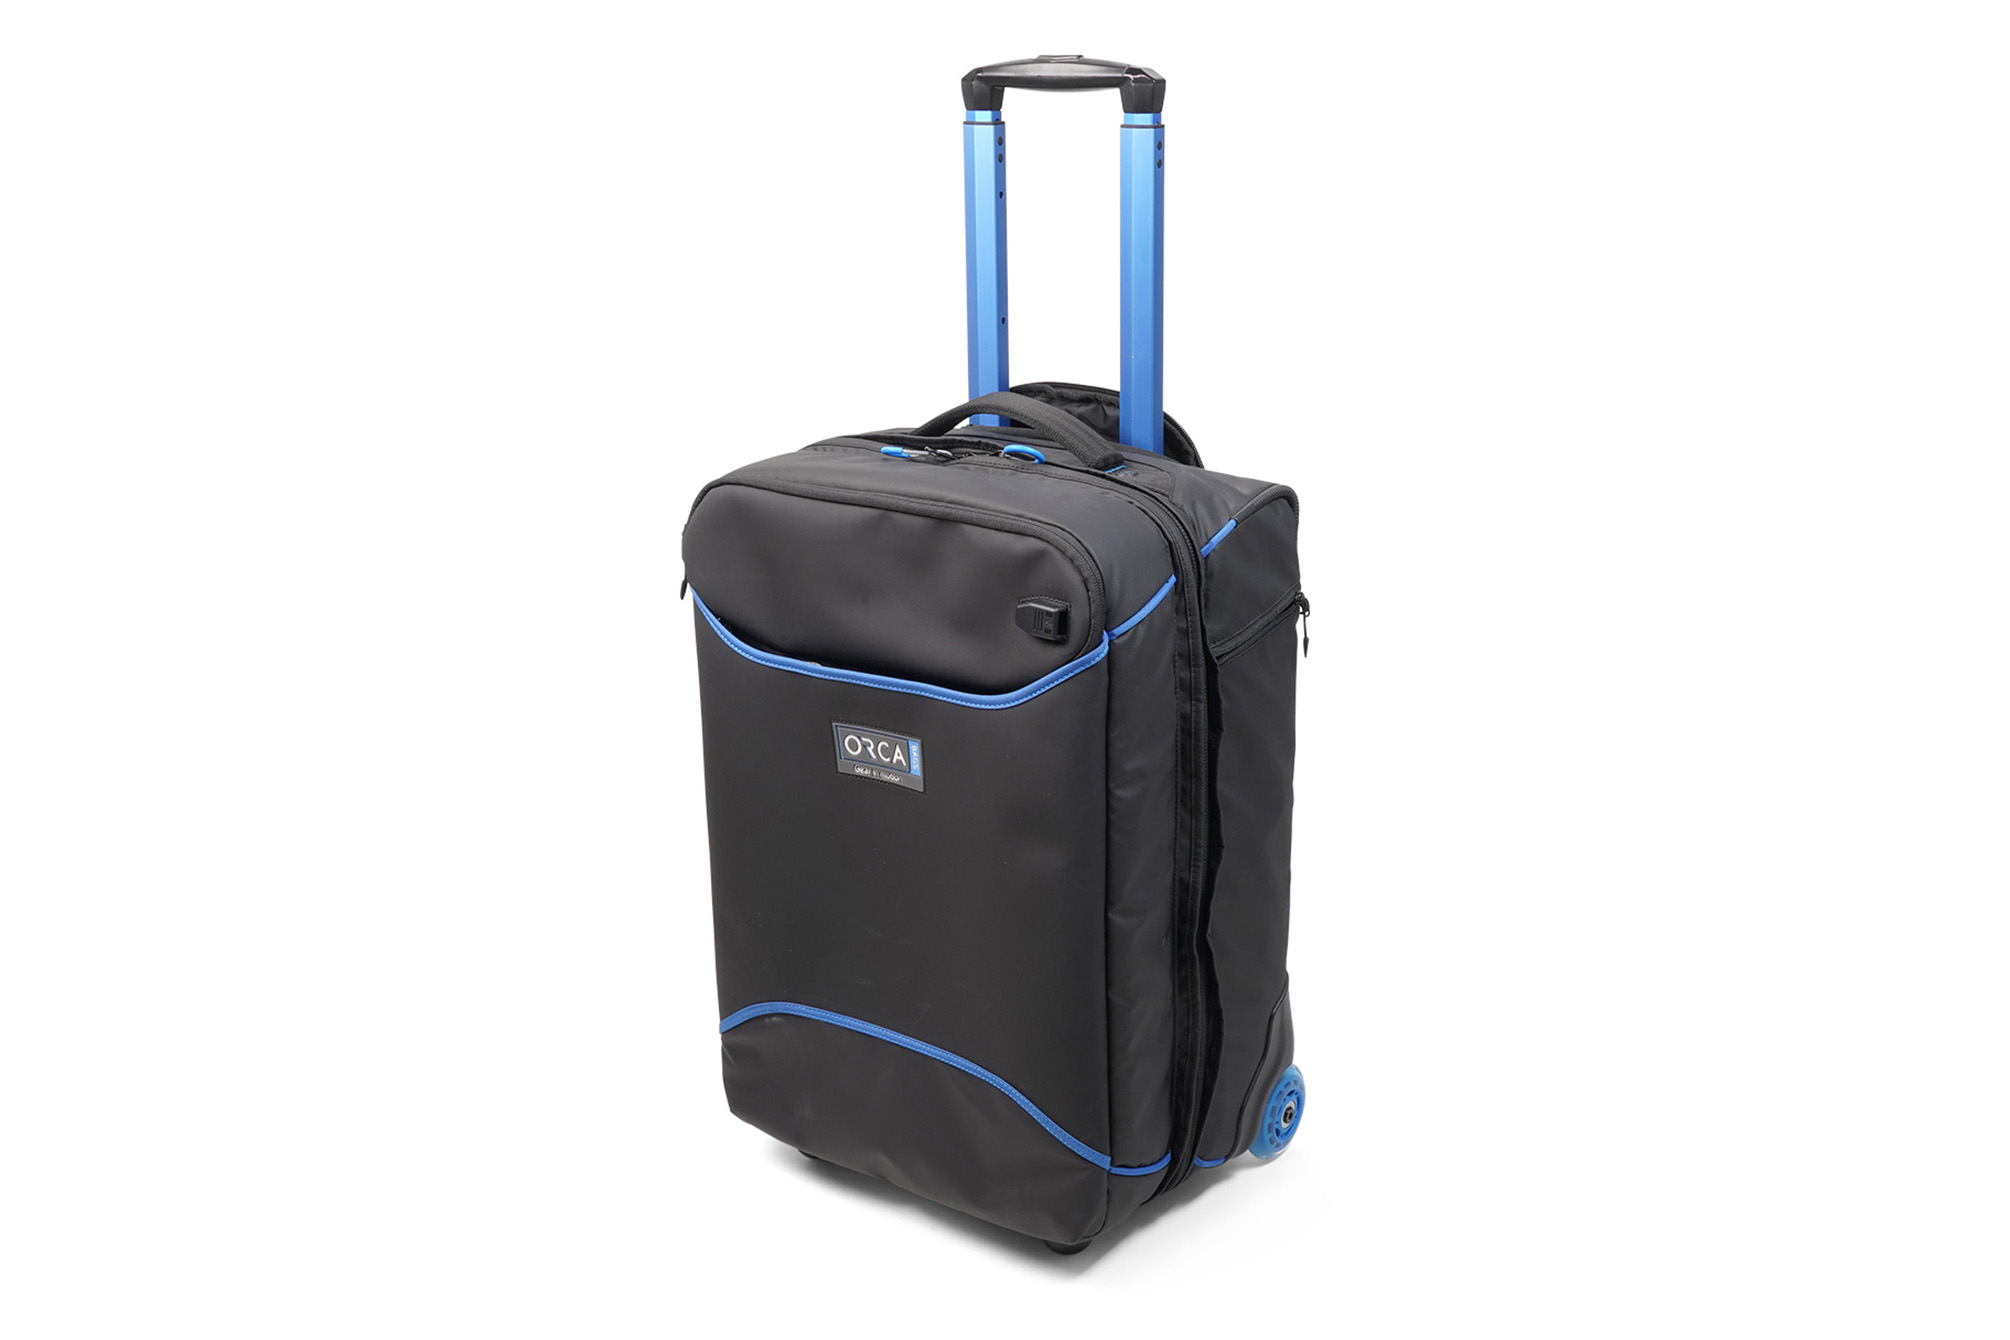 OR-84 Orca Traveller Suitcase, Trolley